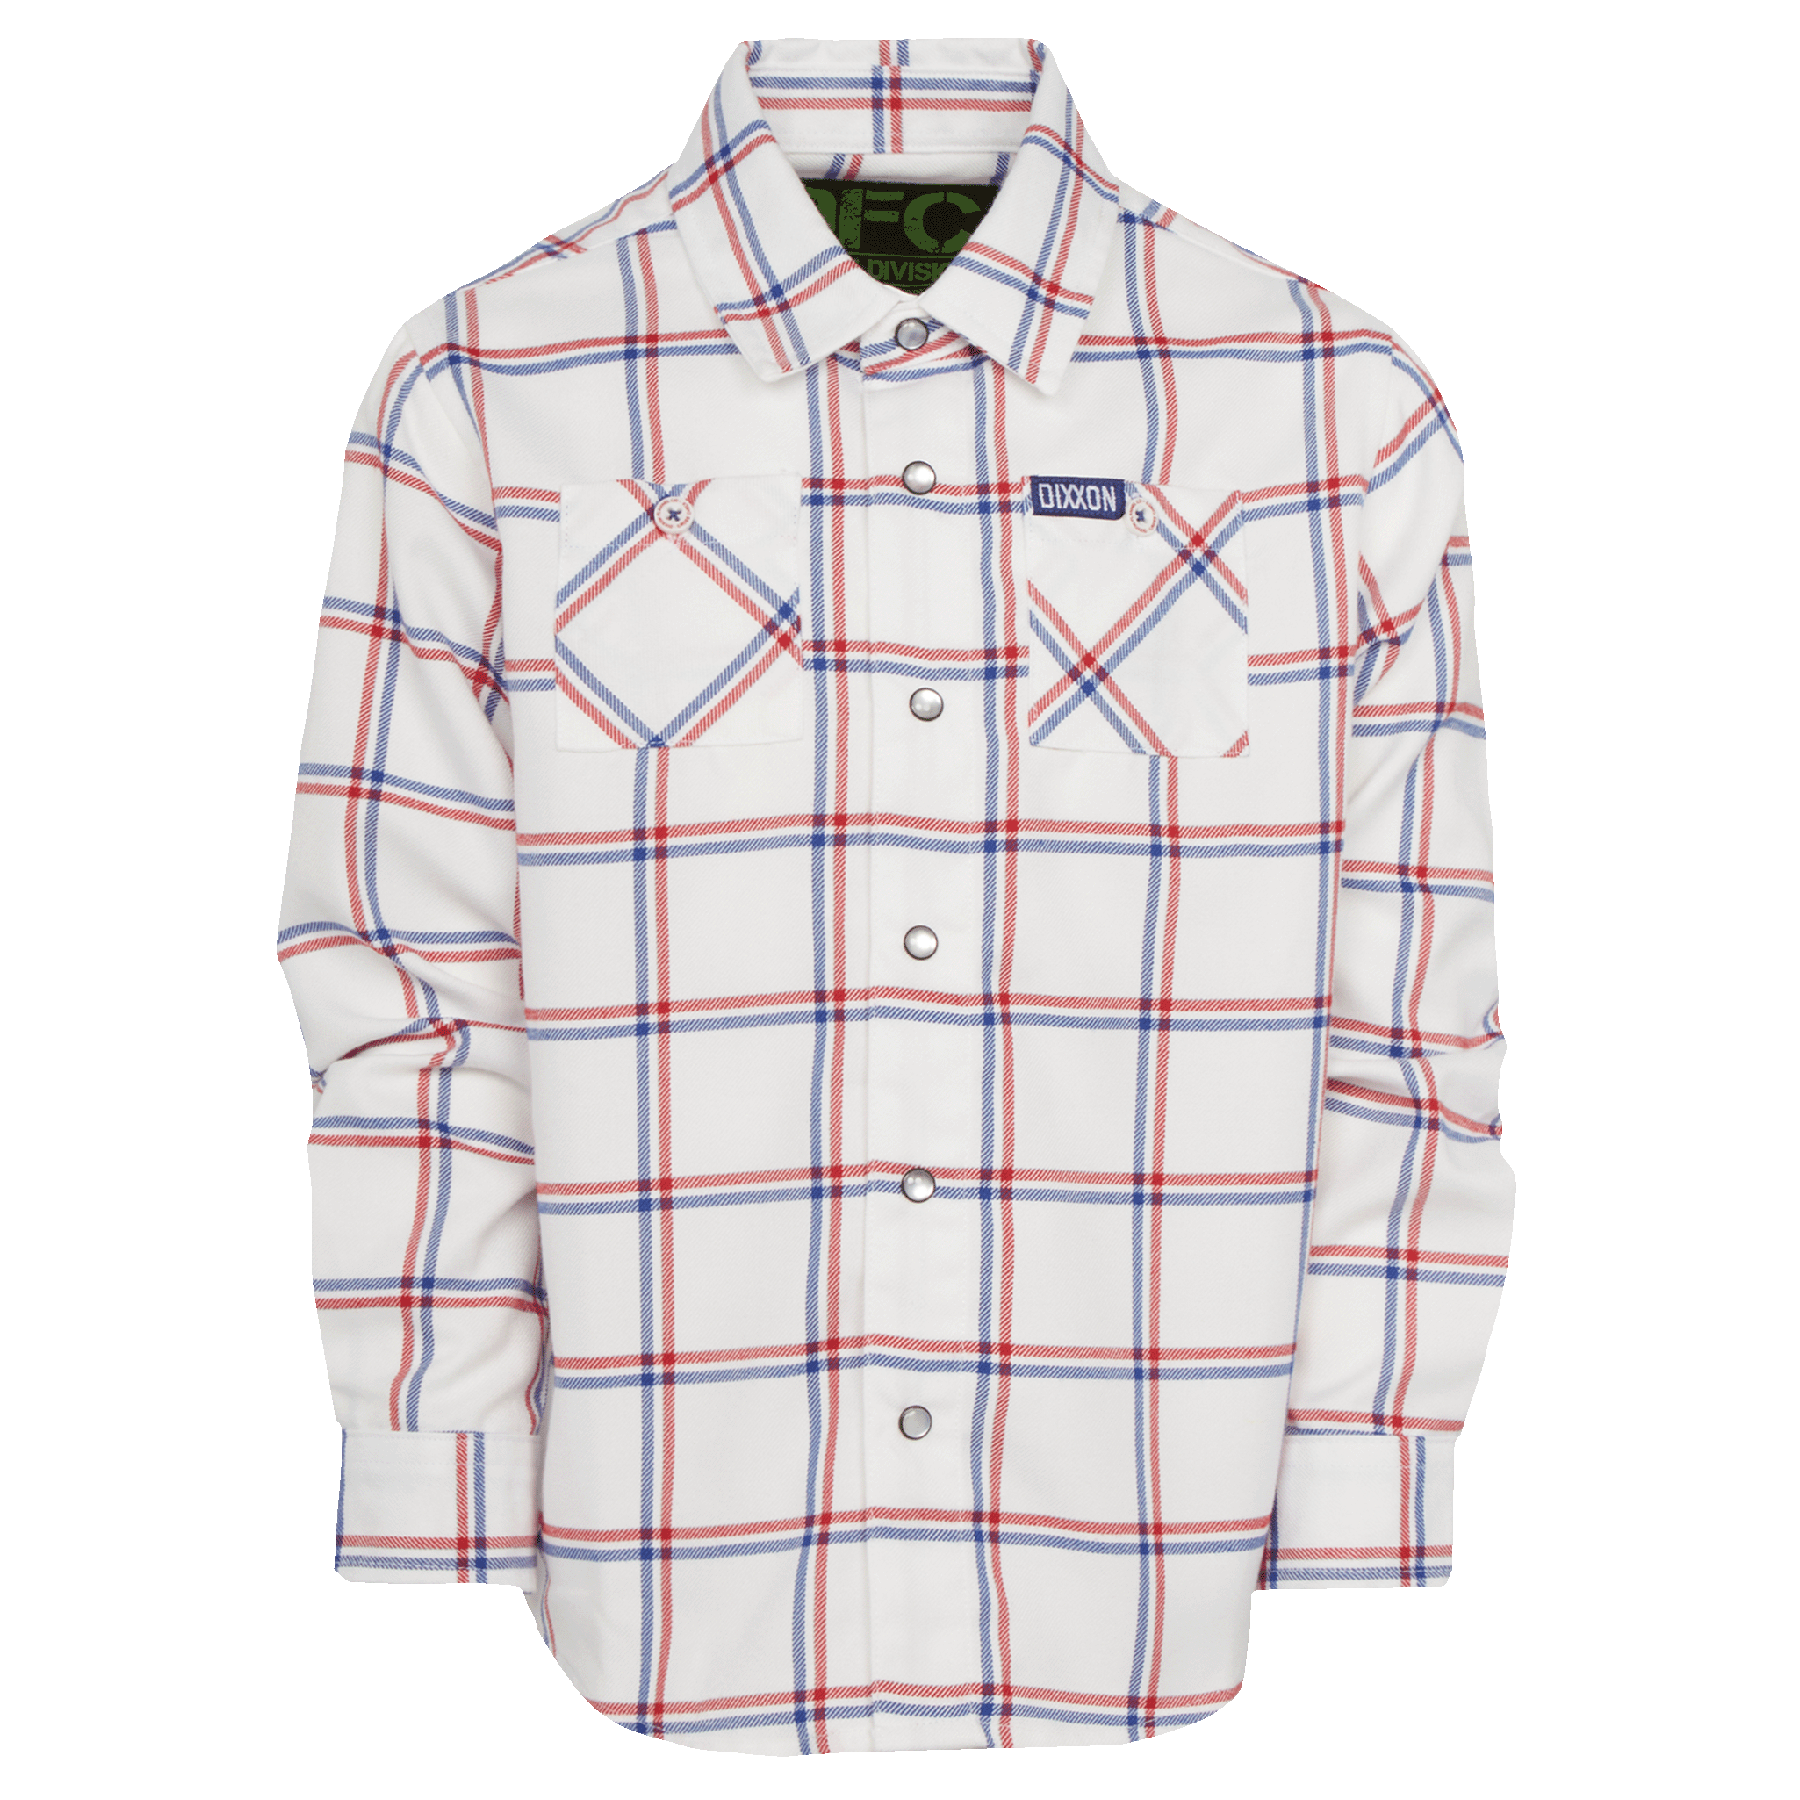 Youth Cross Check Flannel - Dixxon Flannel Co.